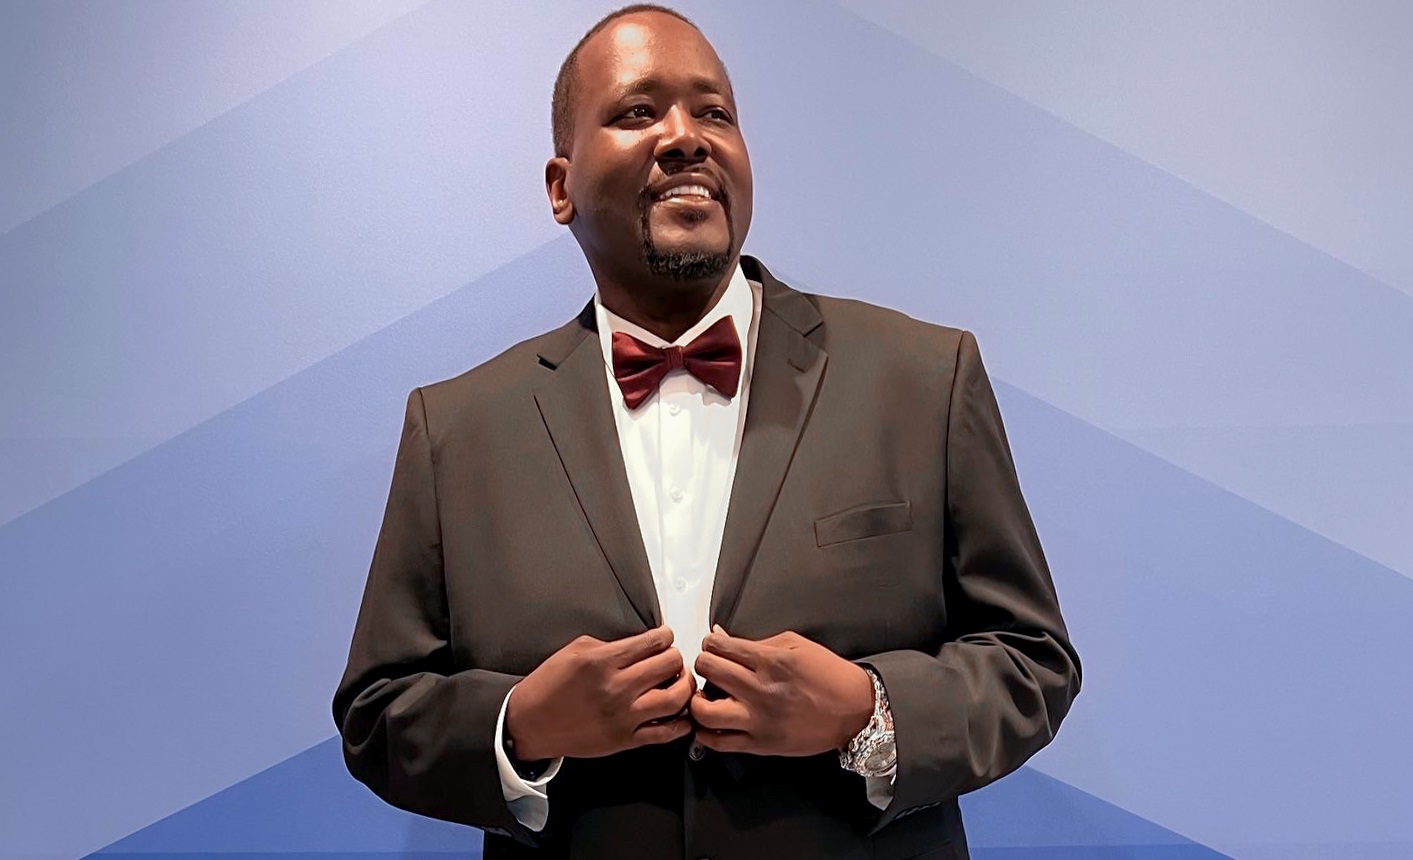 Quinton Aaron of 'The Blind Side' aims to be an inspirational story of his own